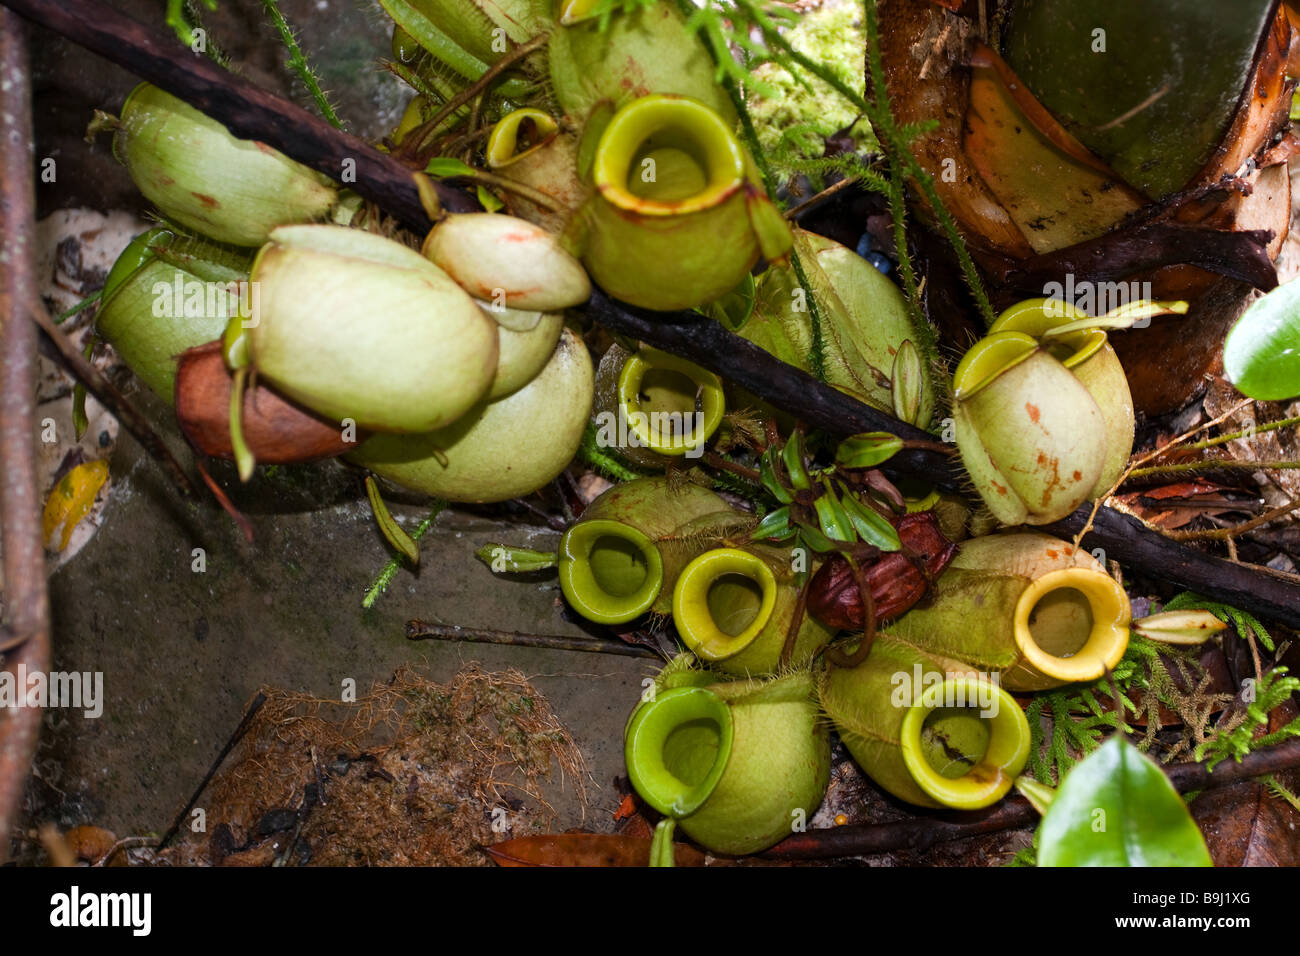 https://c8.alamy.com/comp/B9J1XG/nepenthes-ampullaria-an-insectivorous-pitcher-plant-which-grows-on-B9J1XG.jpg